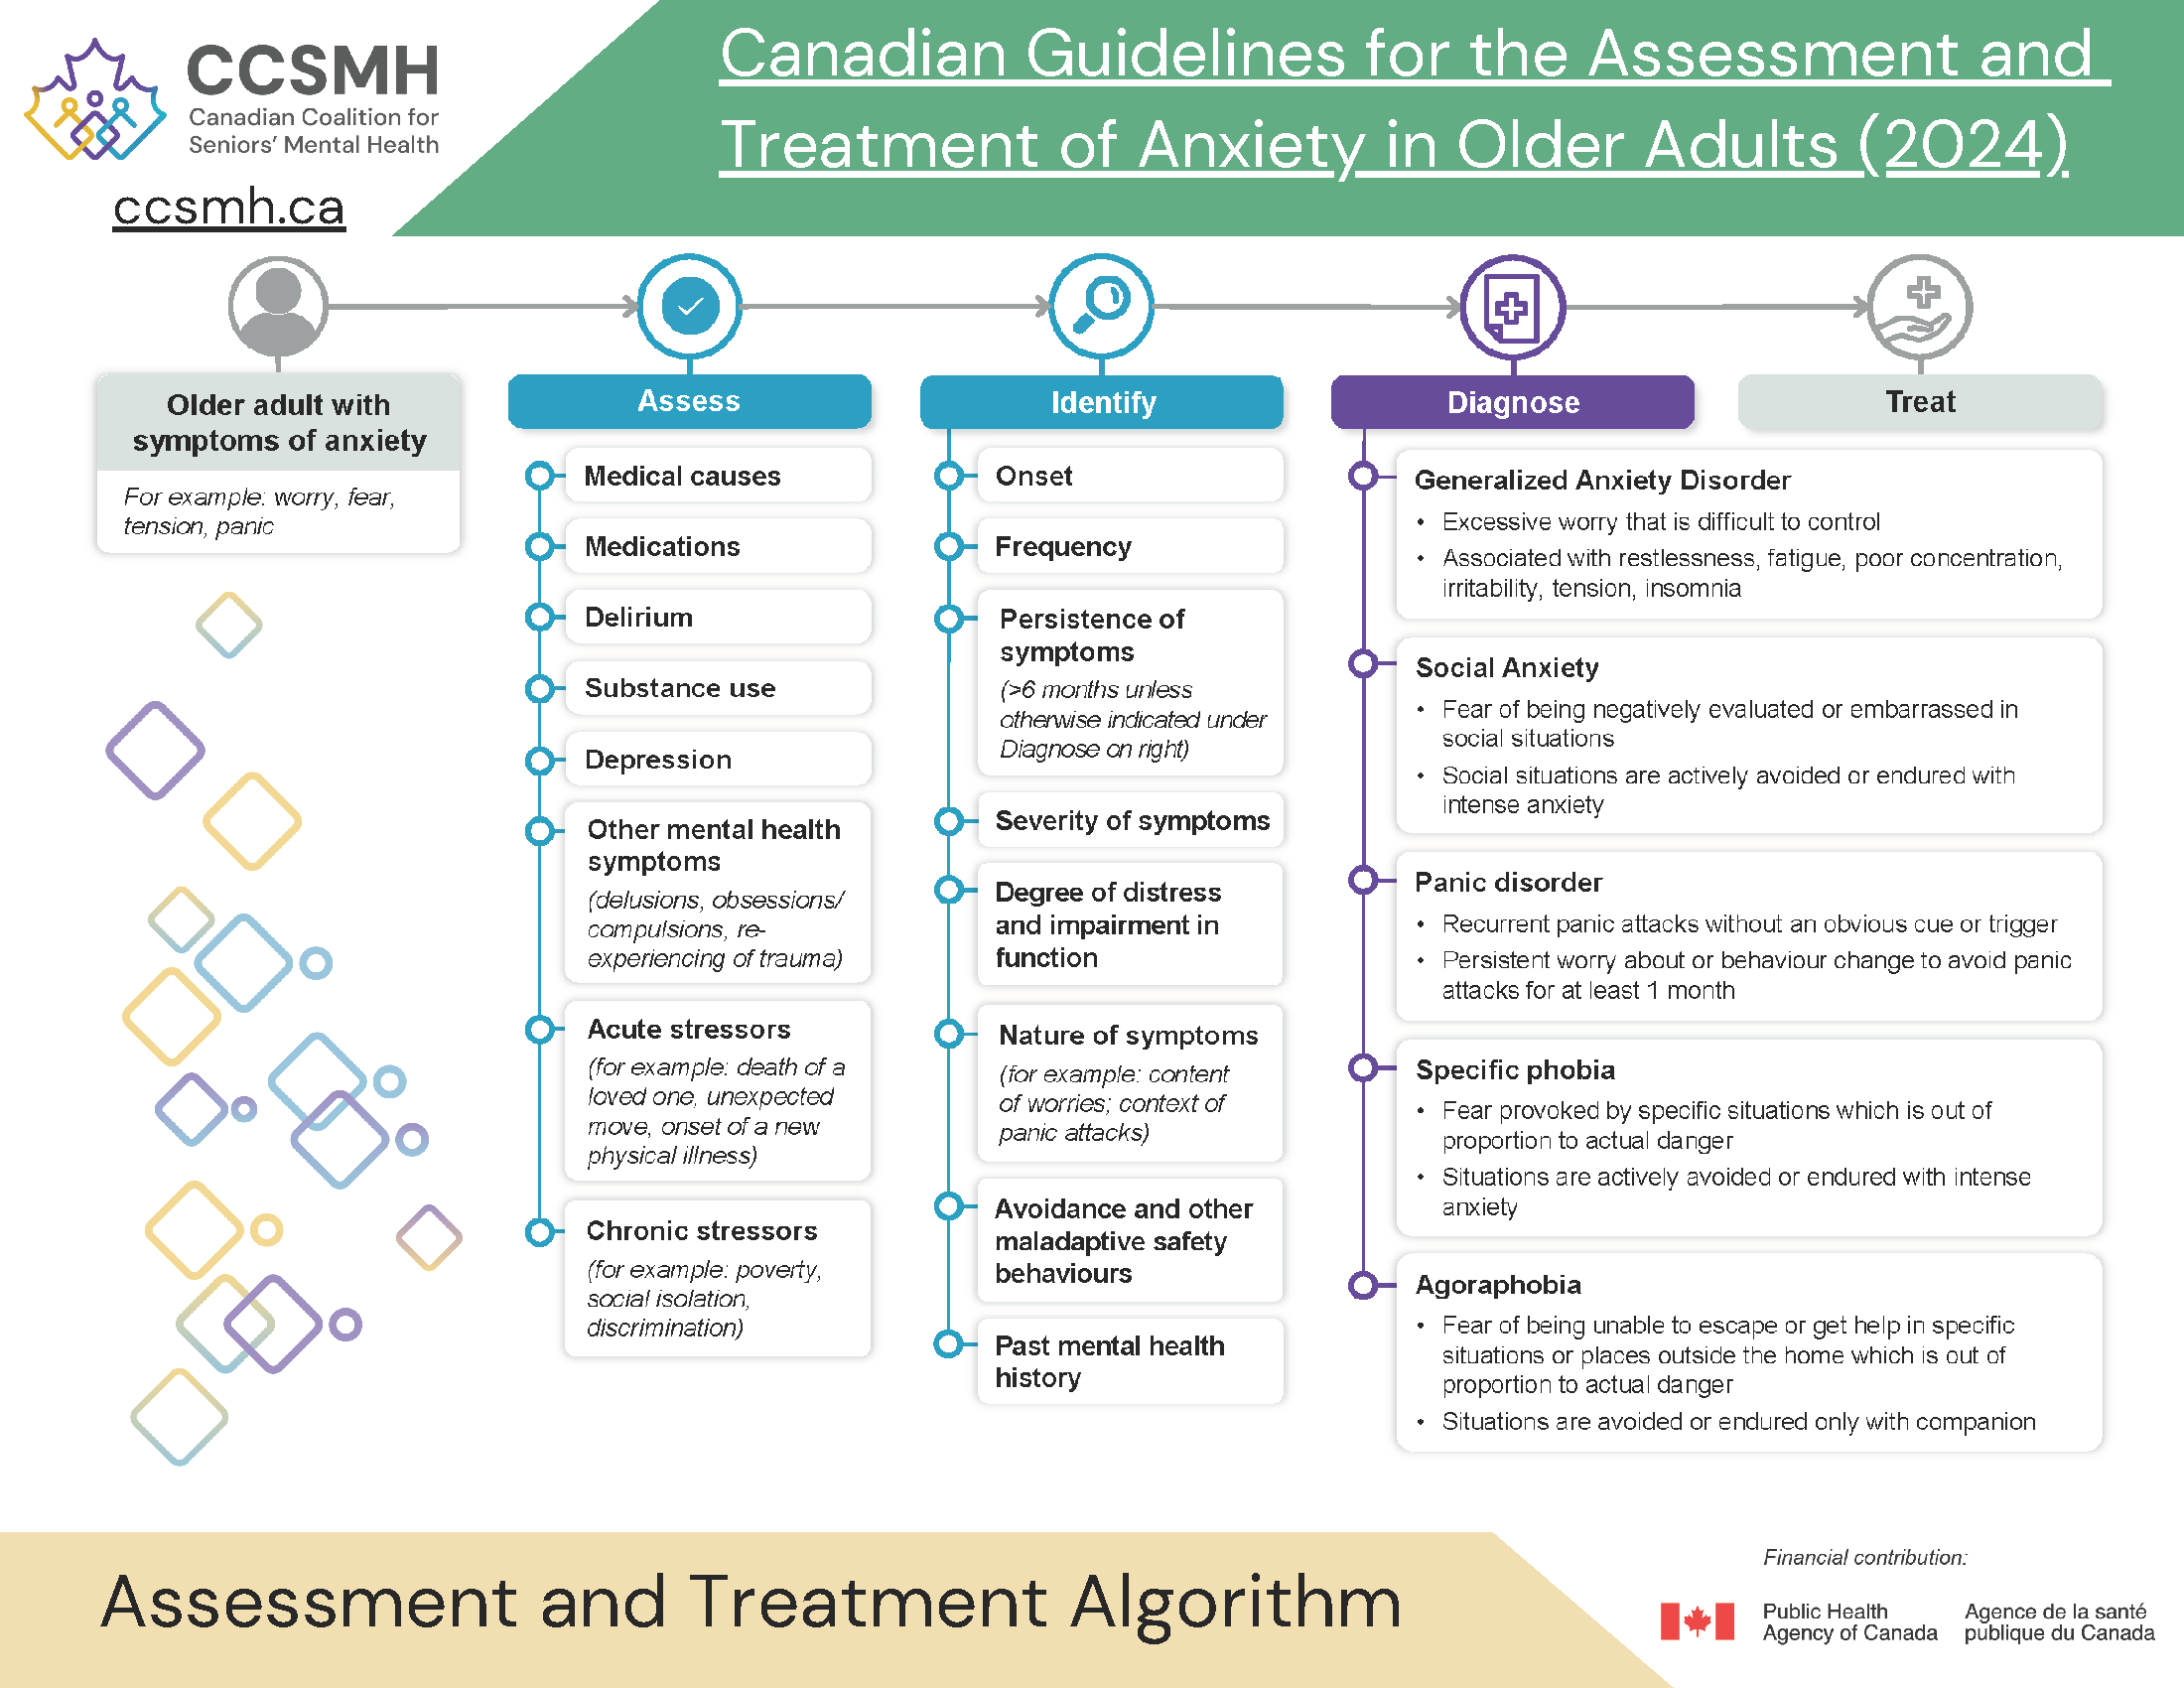 EN_Anxiety Algorithm Infographic PHAC Approved 26 Jan 2024 copy